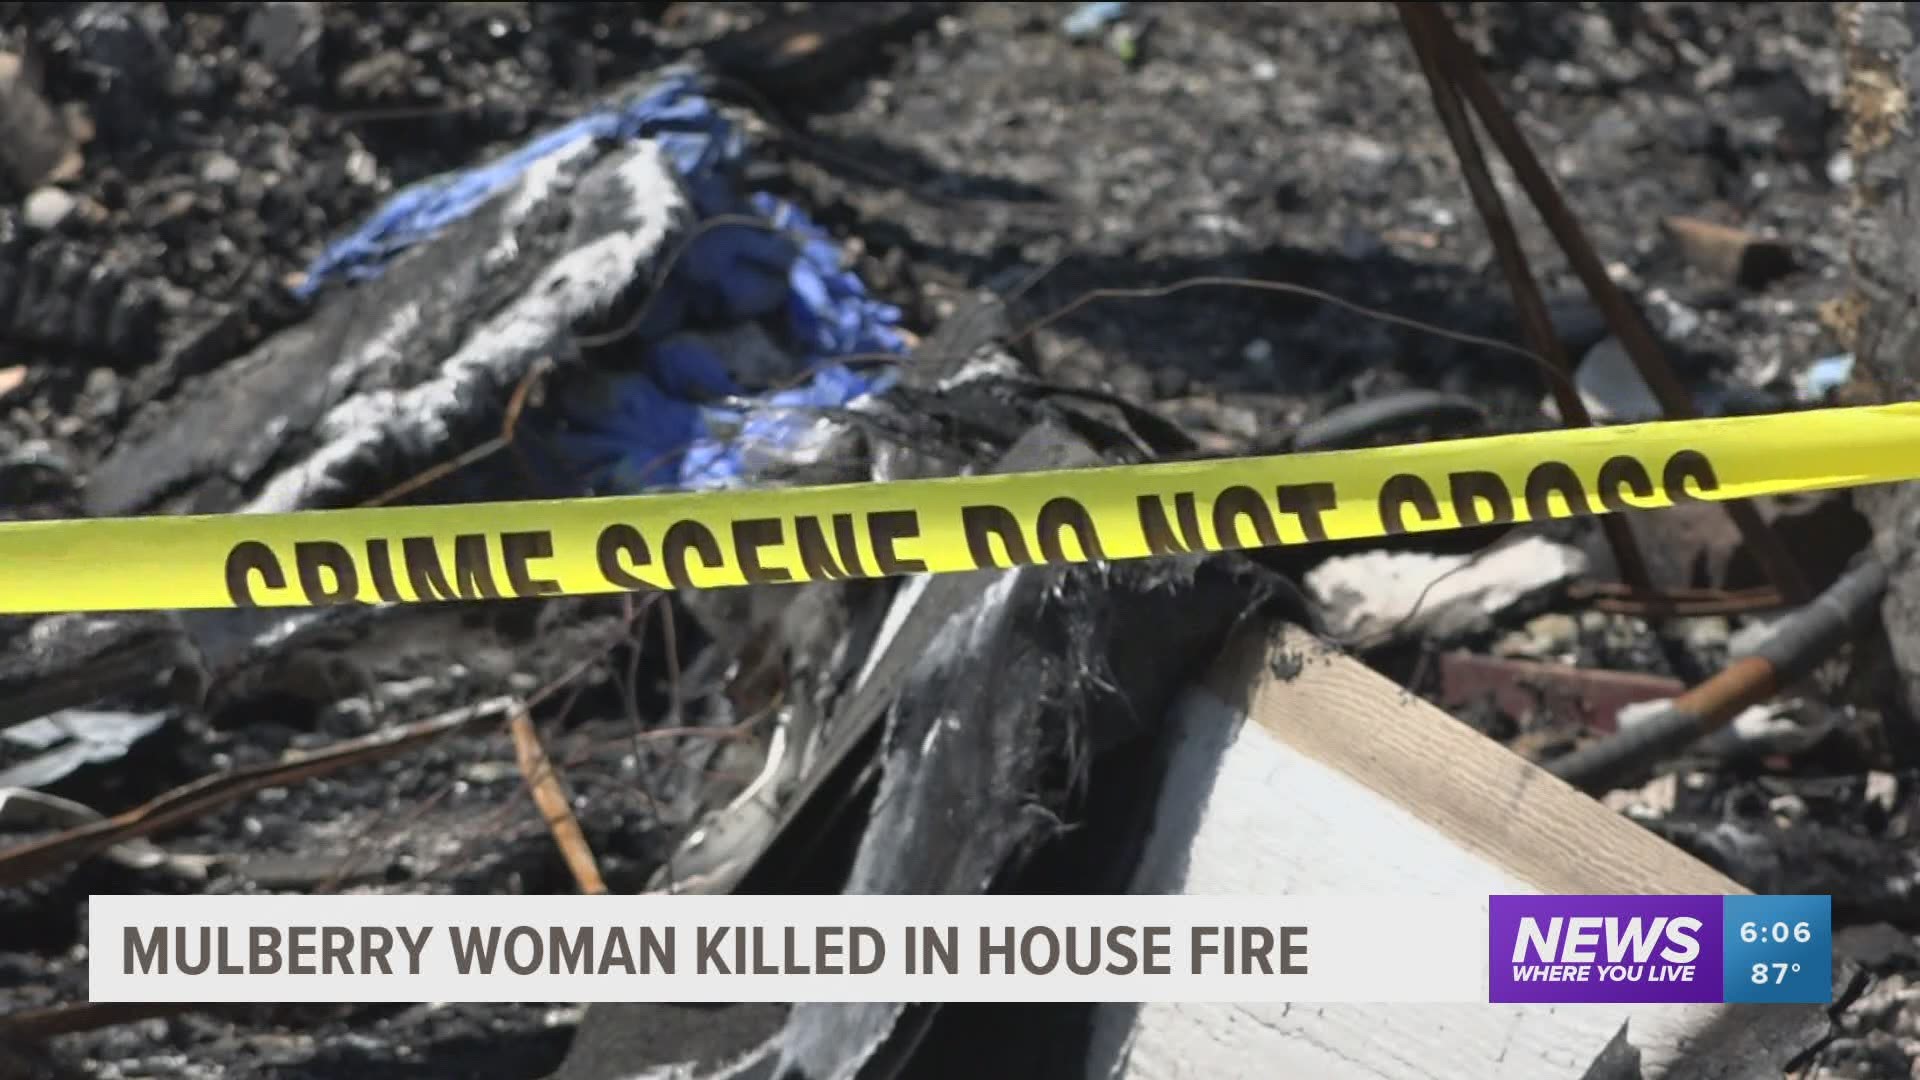 Mulberry woman killed in house fire